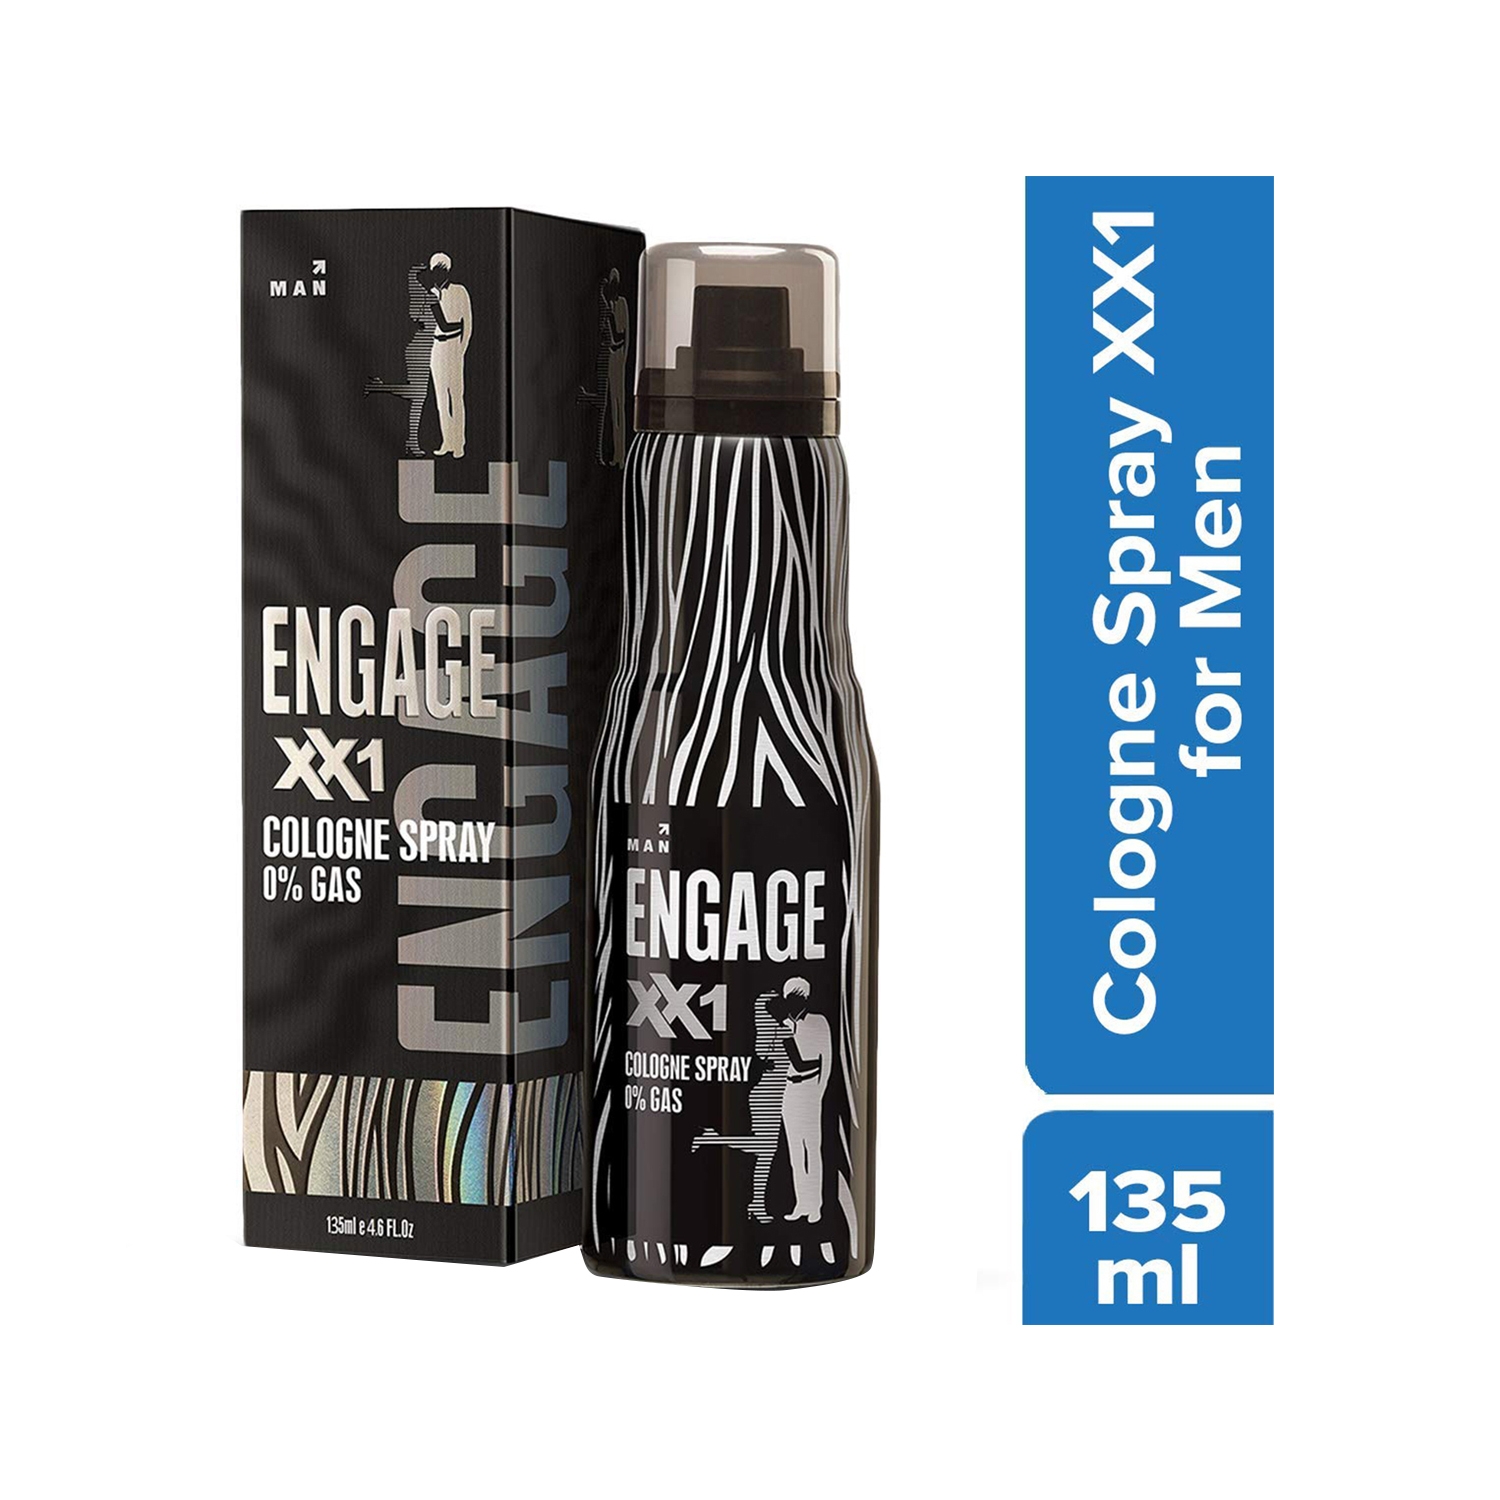 Engage XX1 Cologne Spray For Man (135ml)